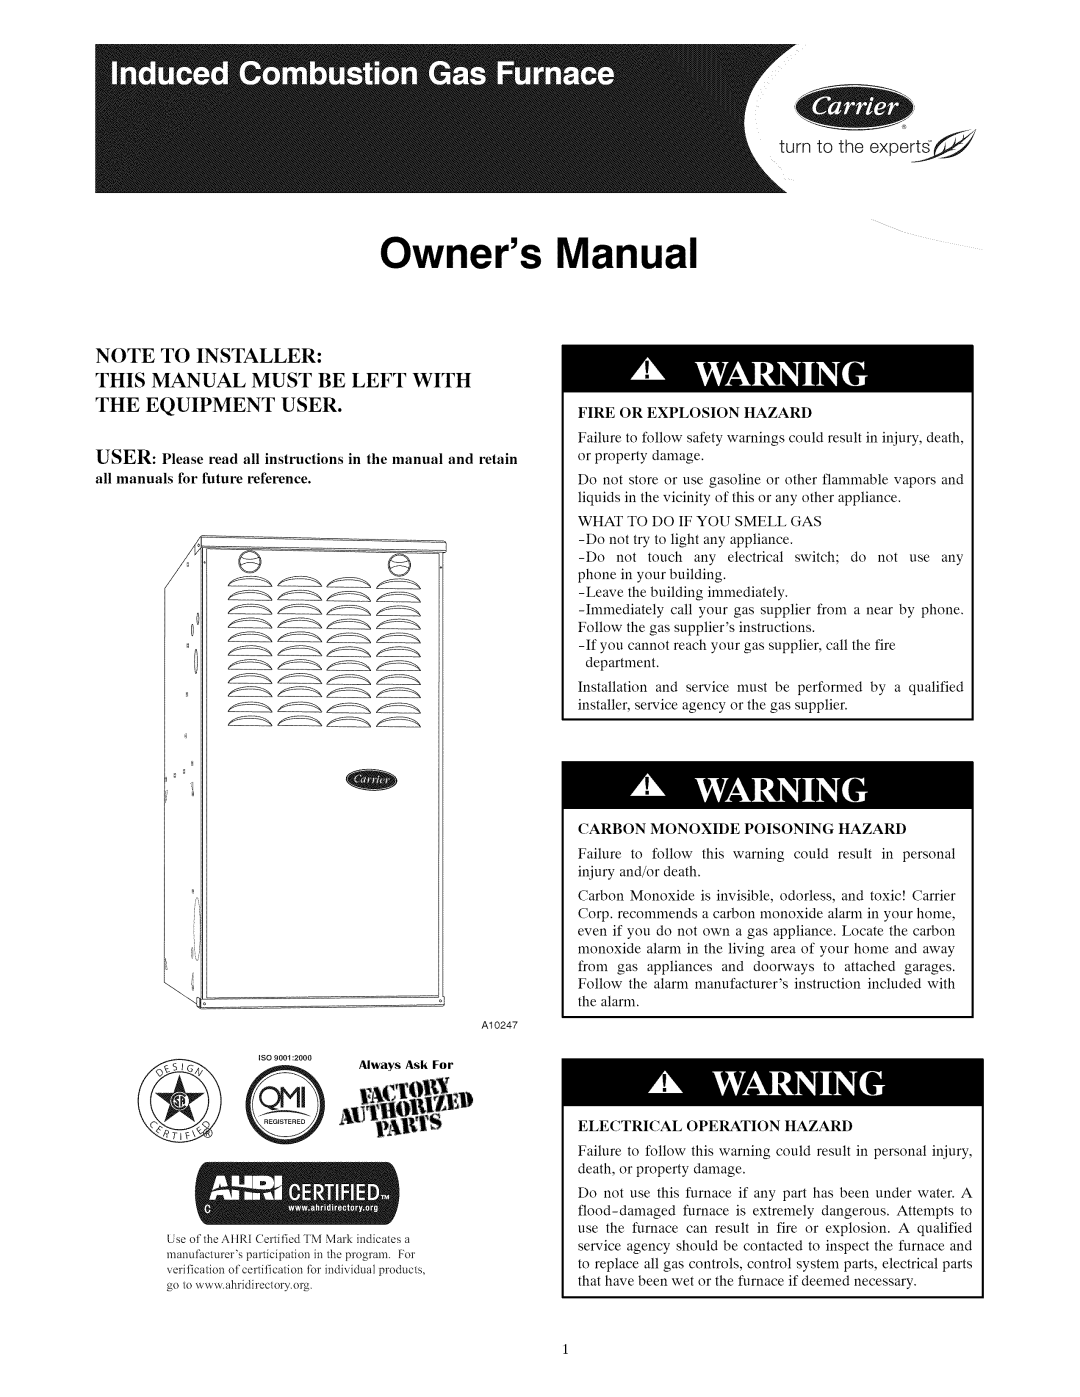 Carrier A10247 owner manual At t, Note To Installer, This Manual Must Be Left With The Equipment User, Always Ask For 